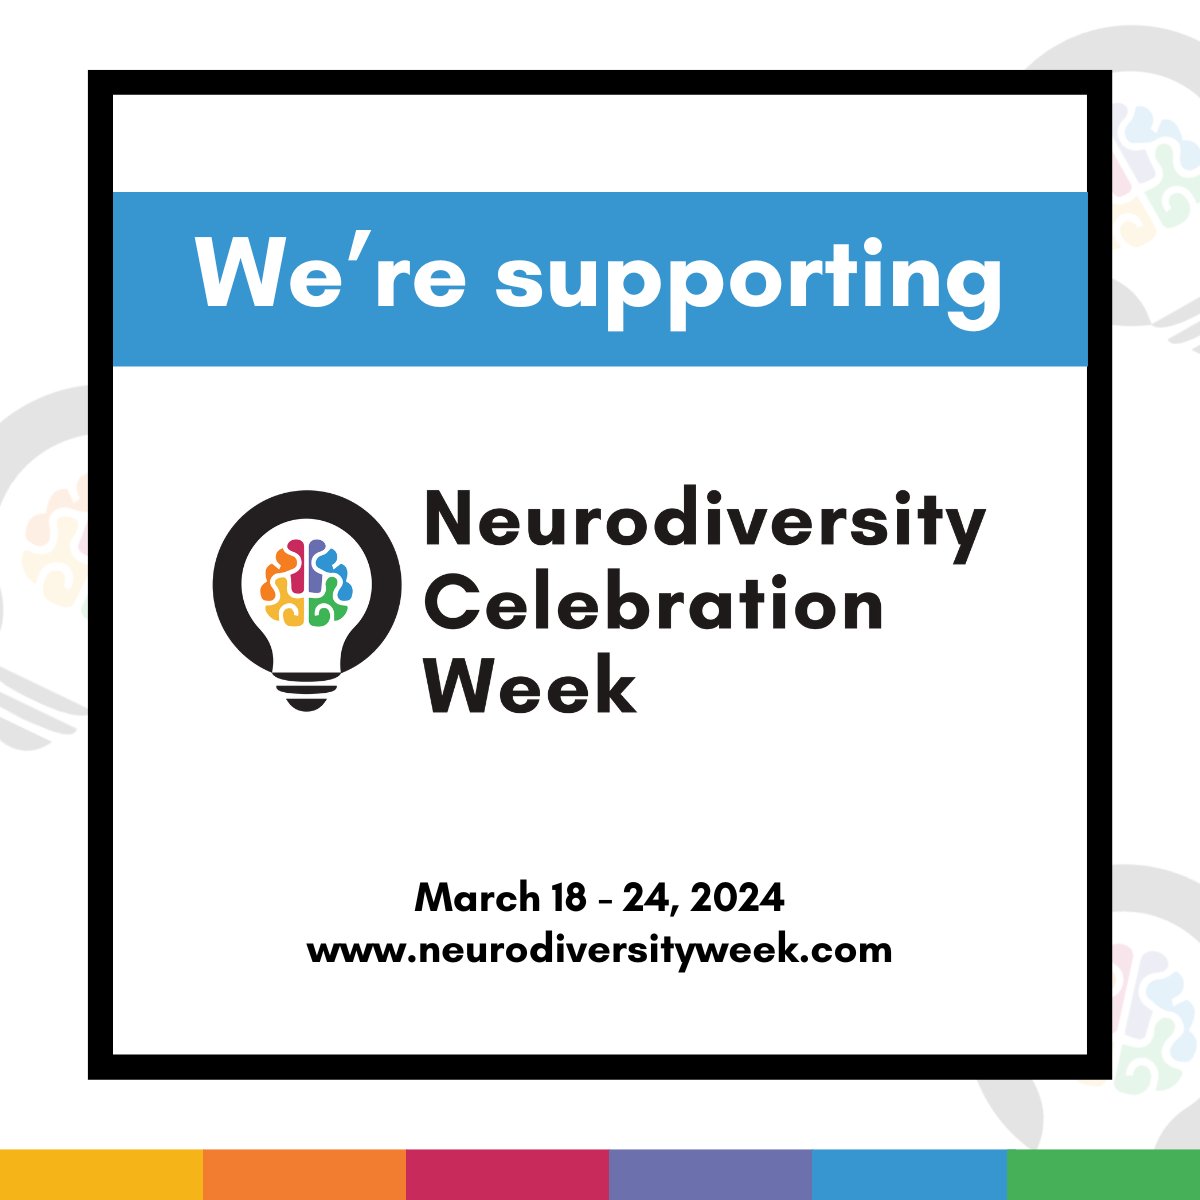 This week is Neurodiversity Celebration Week. Neurodiversity means that everybody's brain works a little bit differently. Lots of people have different strengths, and different struggles. This week we are celebrating difference!